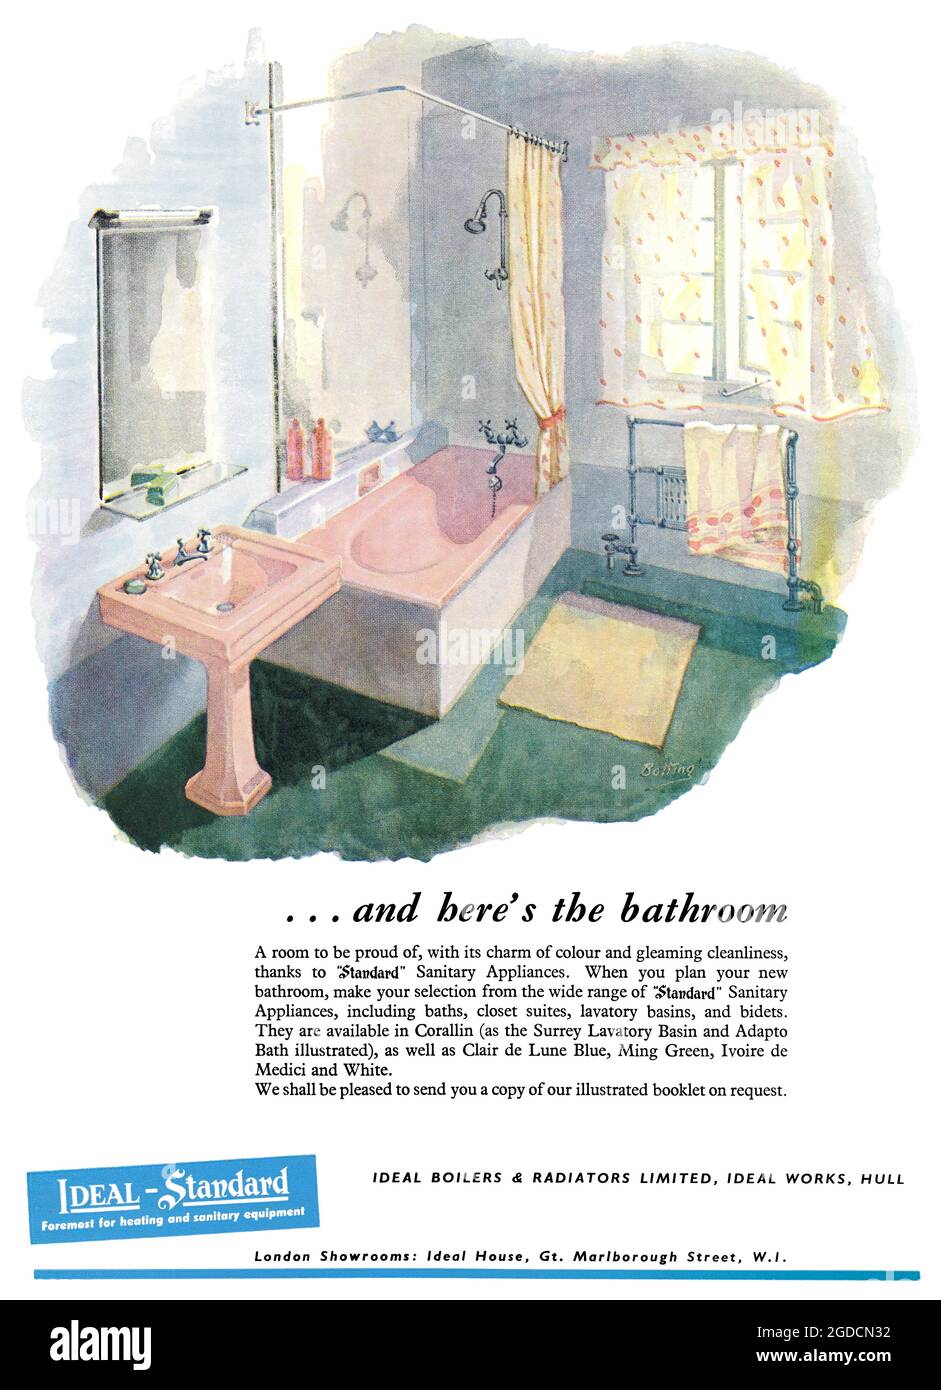 1950 British advertisement for Ideal-Standard bathroom fittings. Stock Photo